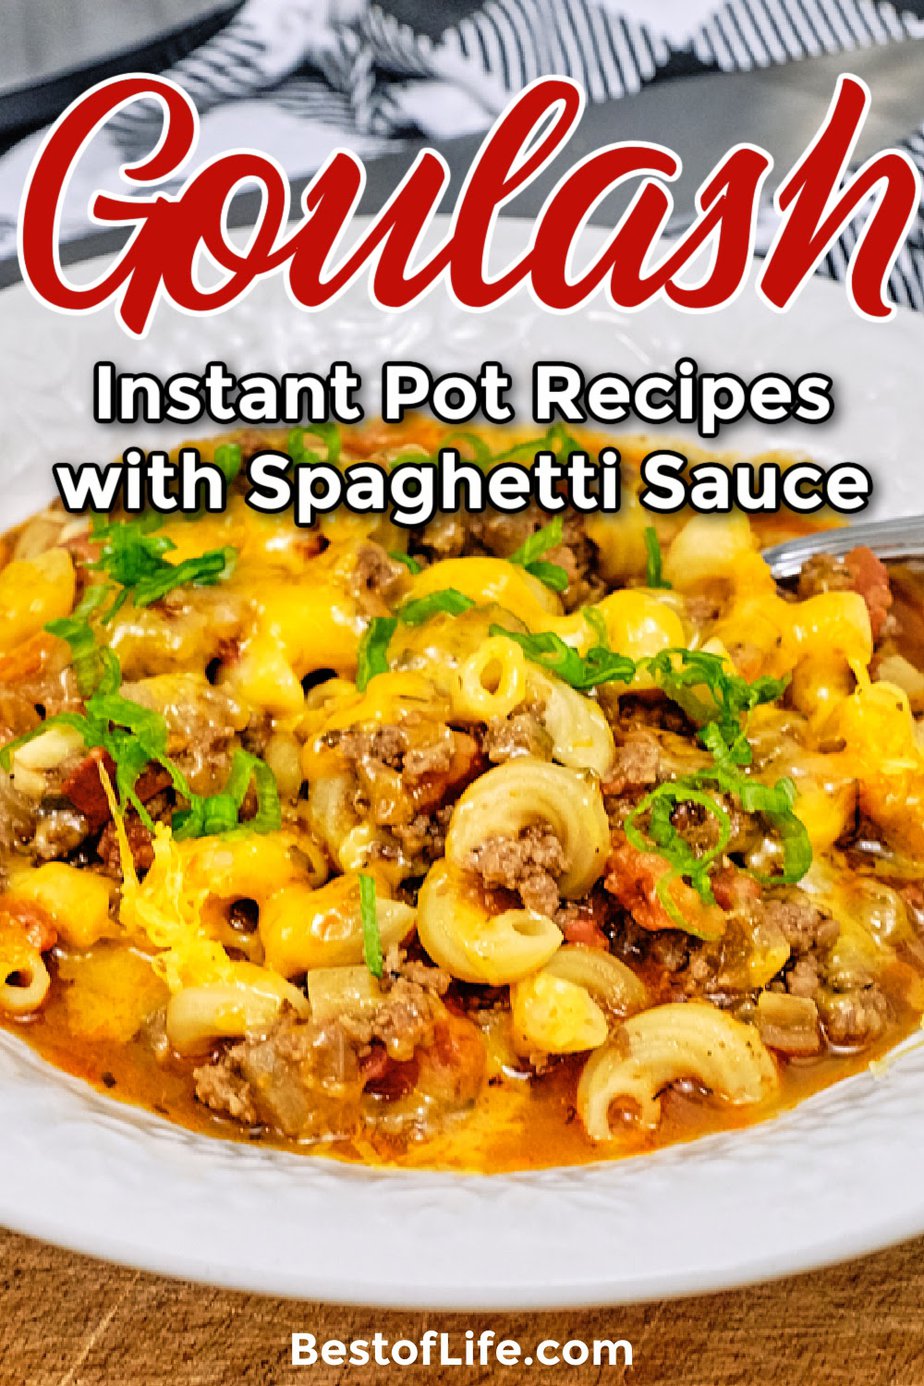 Making these delicious Instant Pot goulash recipes will take what you remember and transform it into an easy family dinner everyone will enjoy. Healthy Instant Pot Recipes | Instant Pot Pasta Recipes | Instant Pot Stew Recipes | Instant Pot Ground Beef Recipes | Easy Dinner Recipes | Instant Pot Recipes with Pasta | Instant Pot Dinner Recipes #instantpotrecipe #pastarecipes